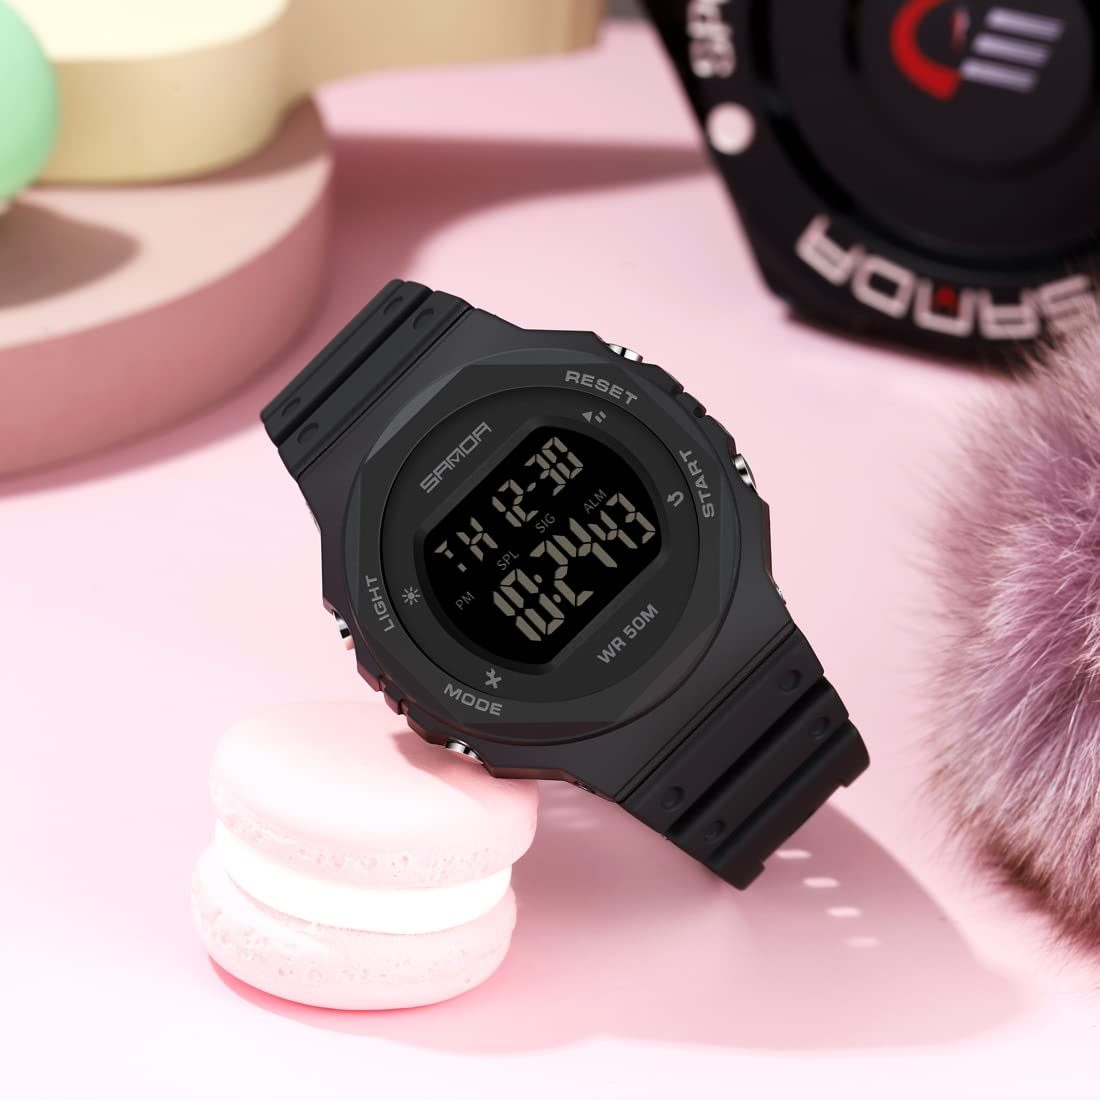 SEFWESRIG Watches for Women, Waterproof Digital Watch with Stopwatch Military Multifunctional Watch, Classic Outdoor LED Backlight Sports Watches